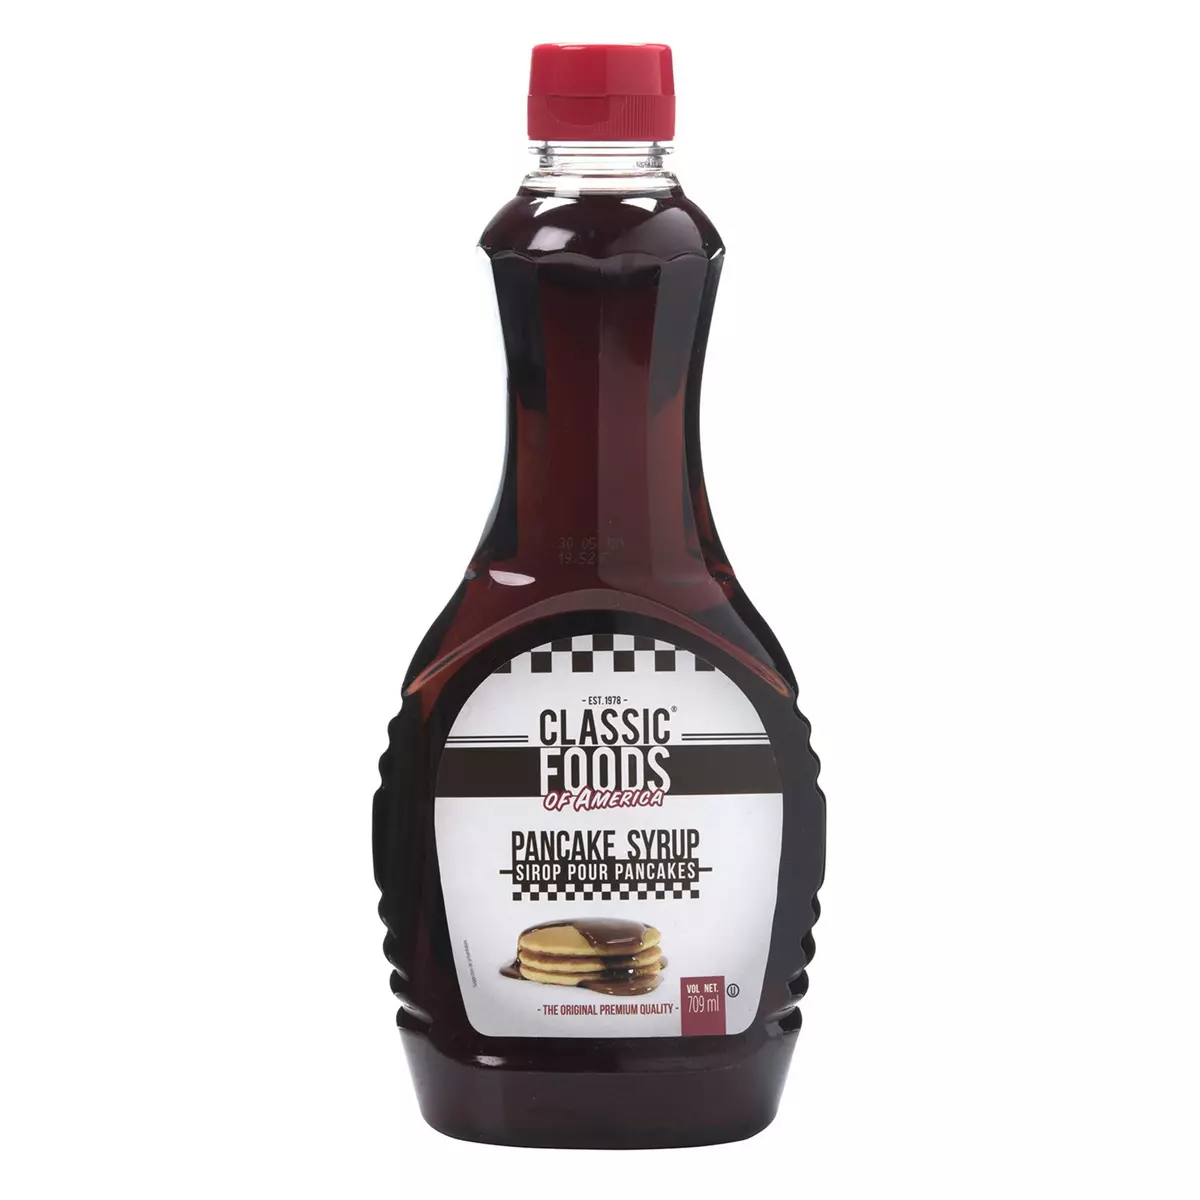 CLASSIC FOODS OF AMERICA Sirop pour pancakes 709ml